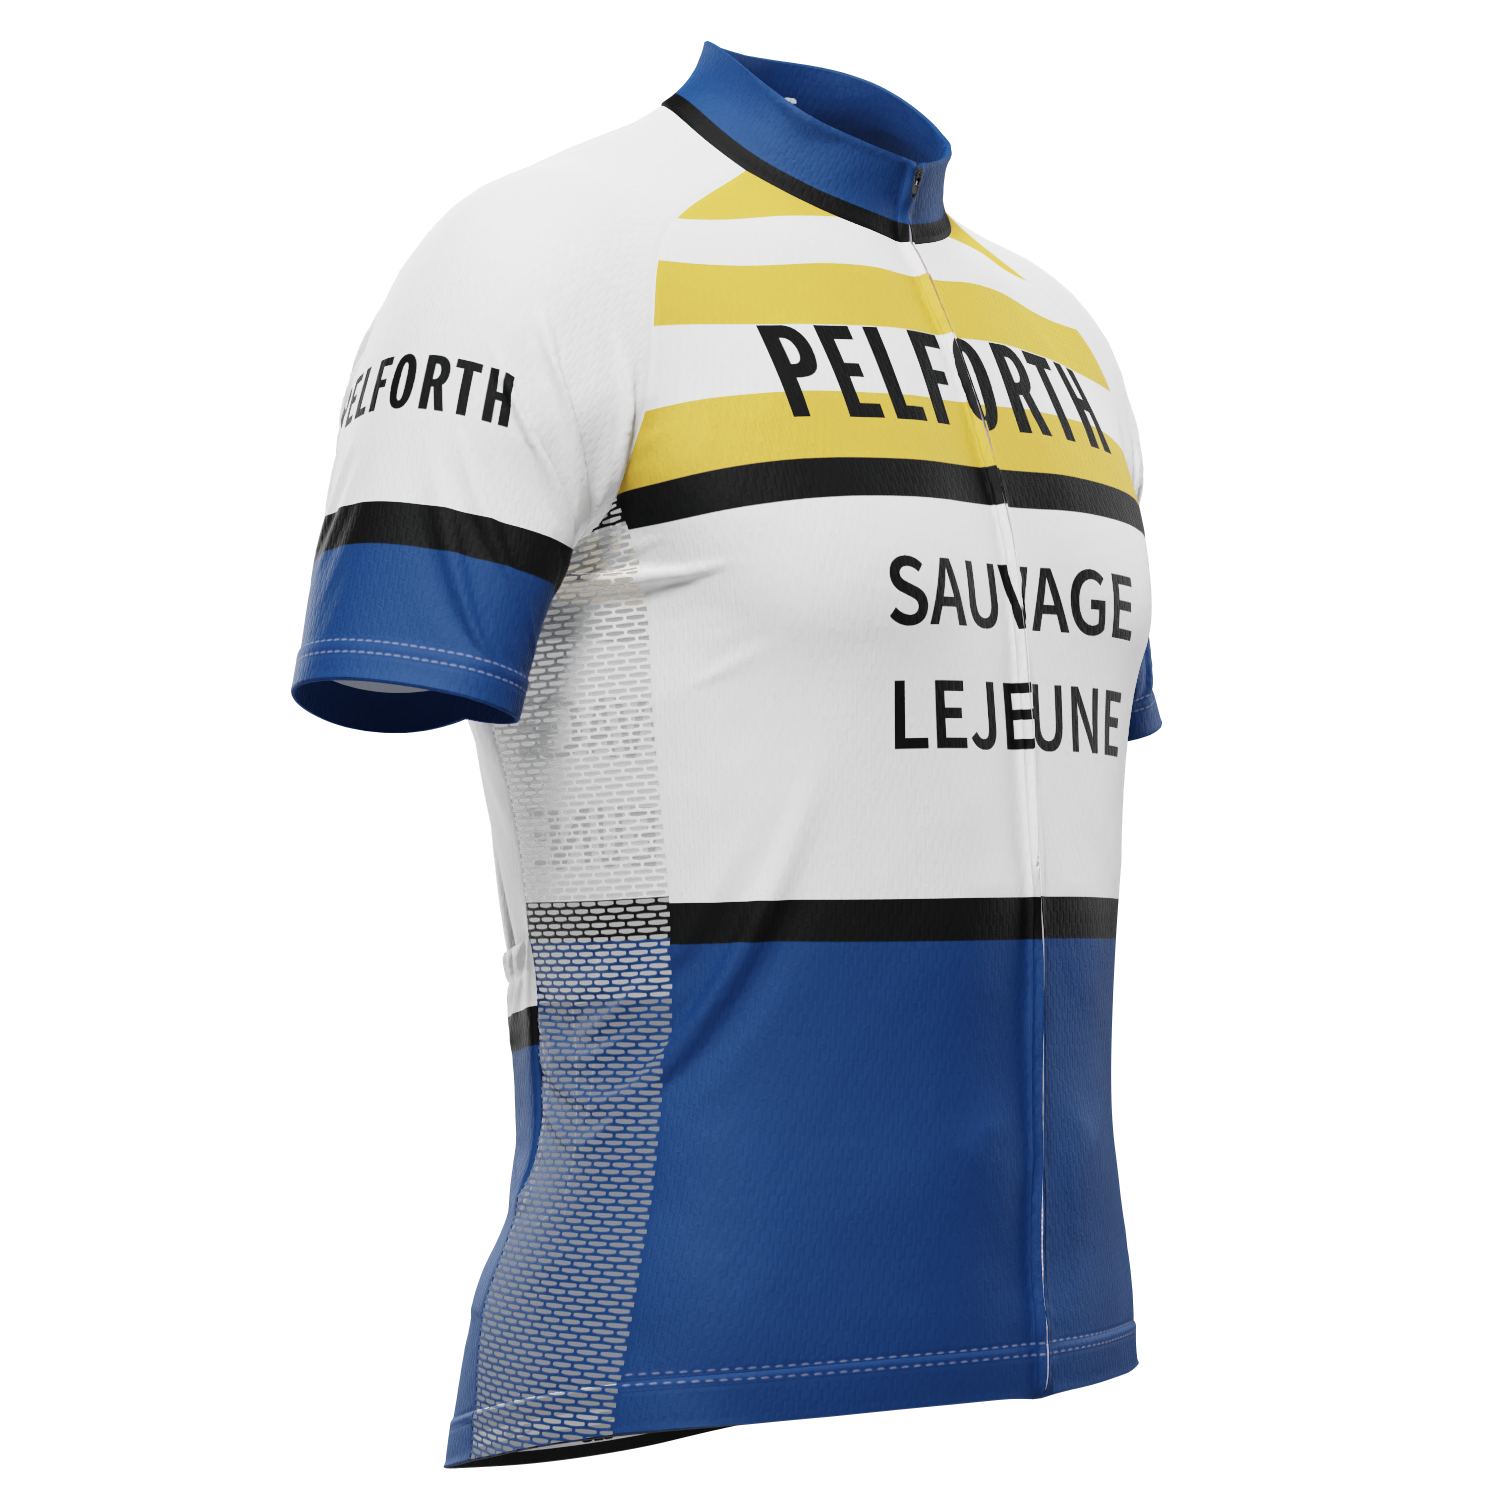 Men's French Pelforth–Sauvage–Lejeune Short Sleeve Cycling Jersey